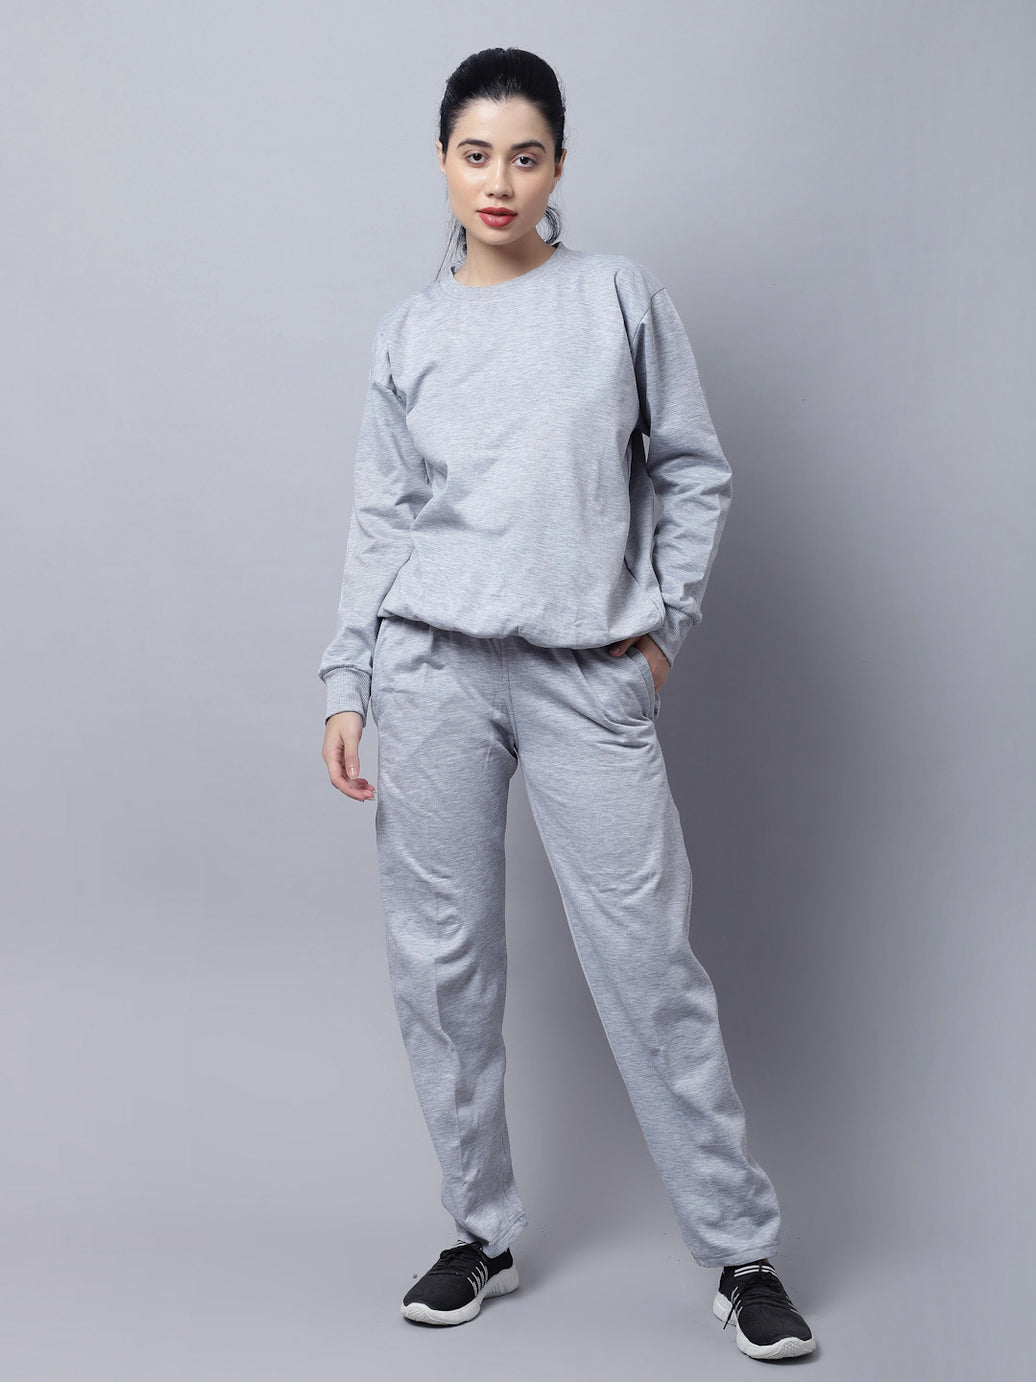 Plain Ladies Sports Wear Track Suit at Rs 599/piece in New Delhi